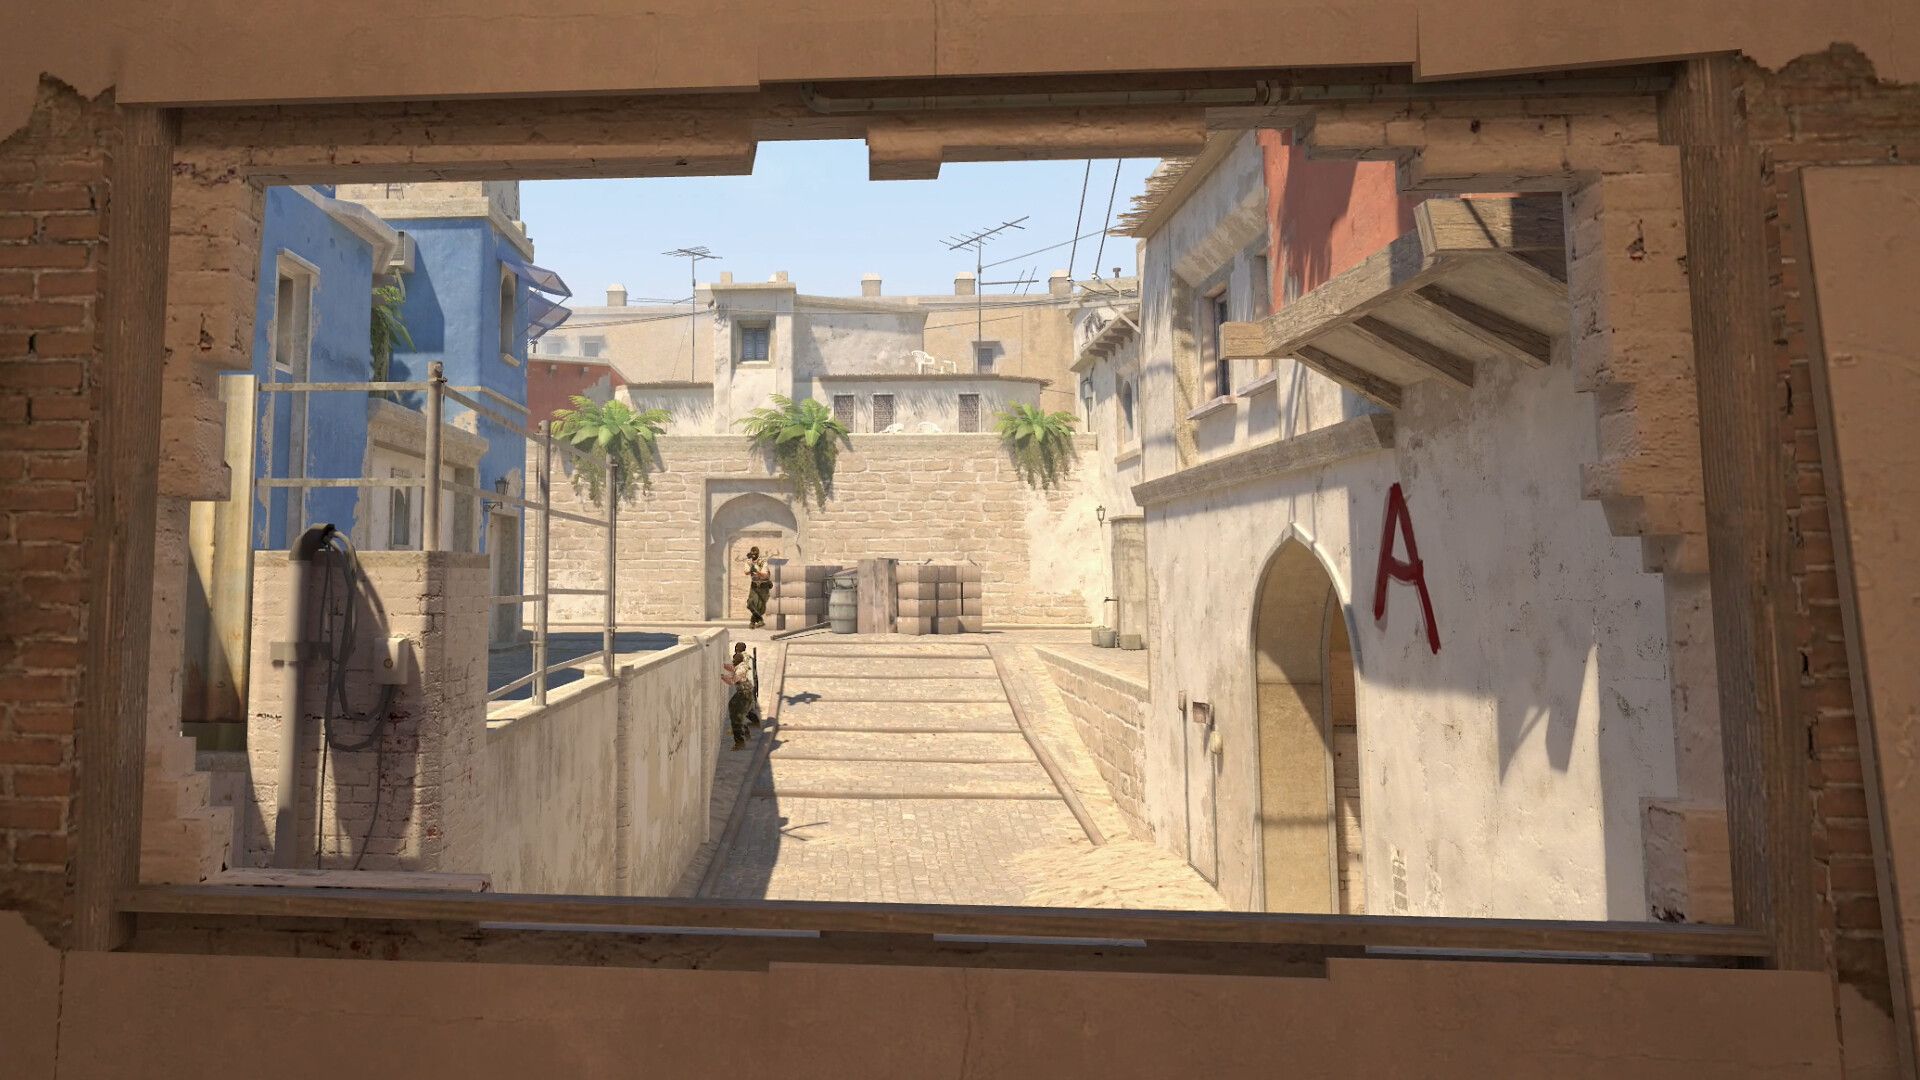 De Dust2 from Counter-Strike Online 2 for Counter-Strike Source